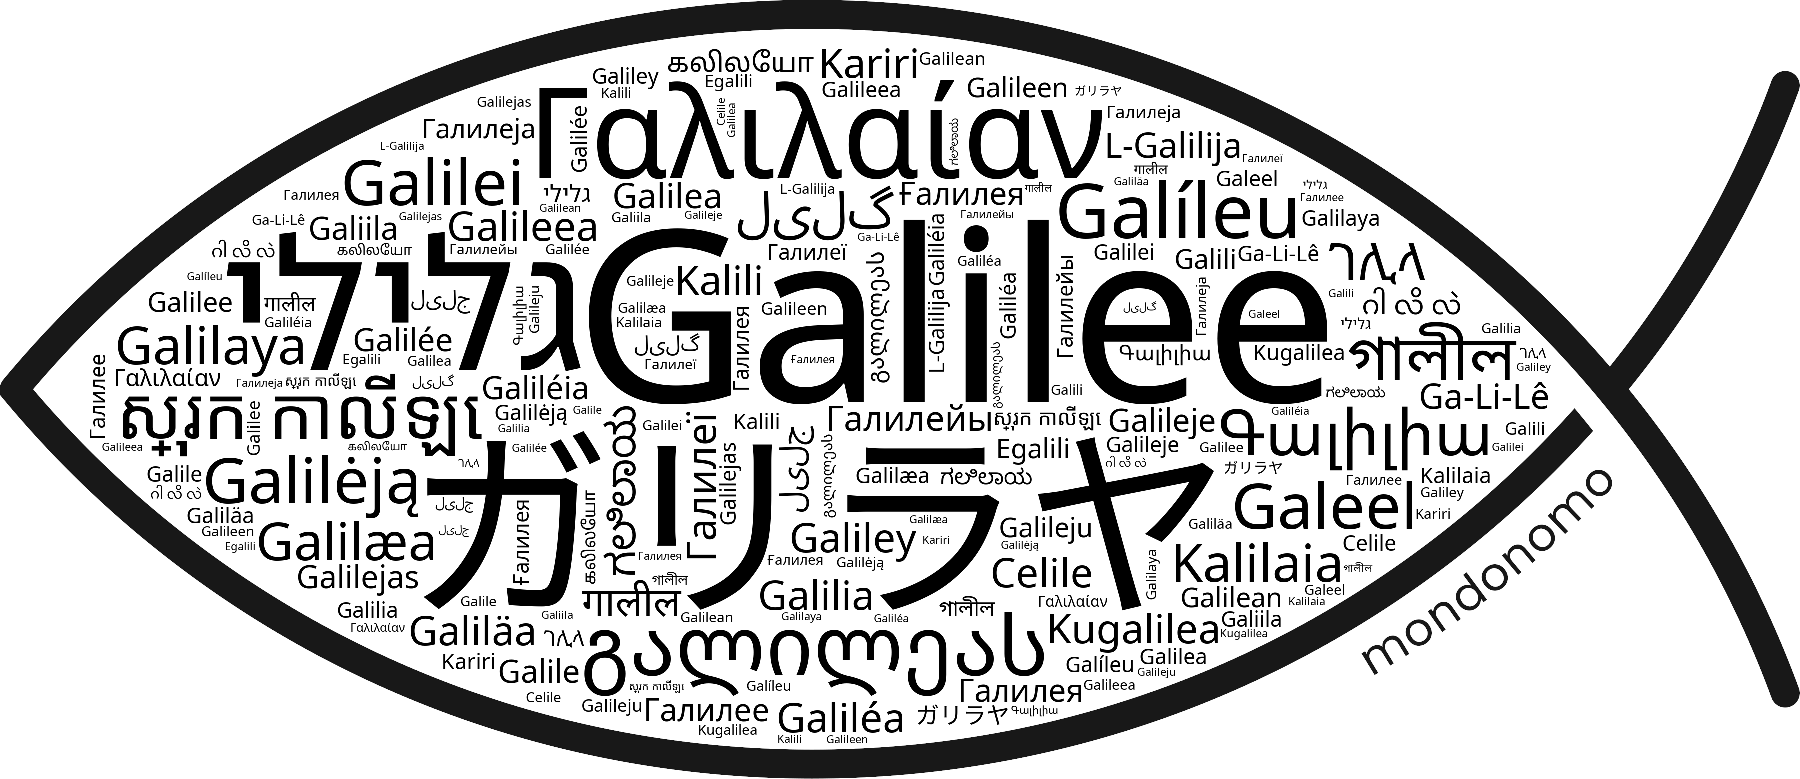 Name Galilee in the world's Bibles